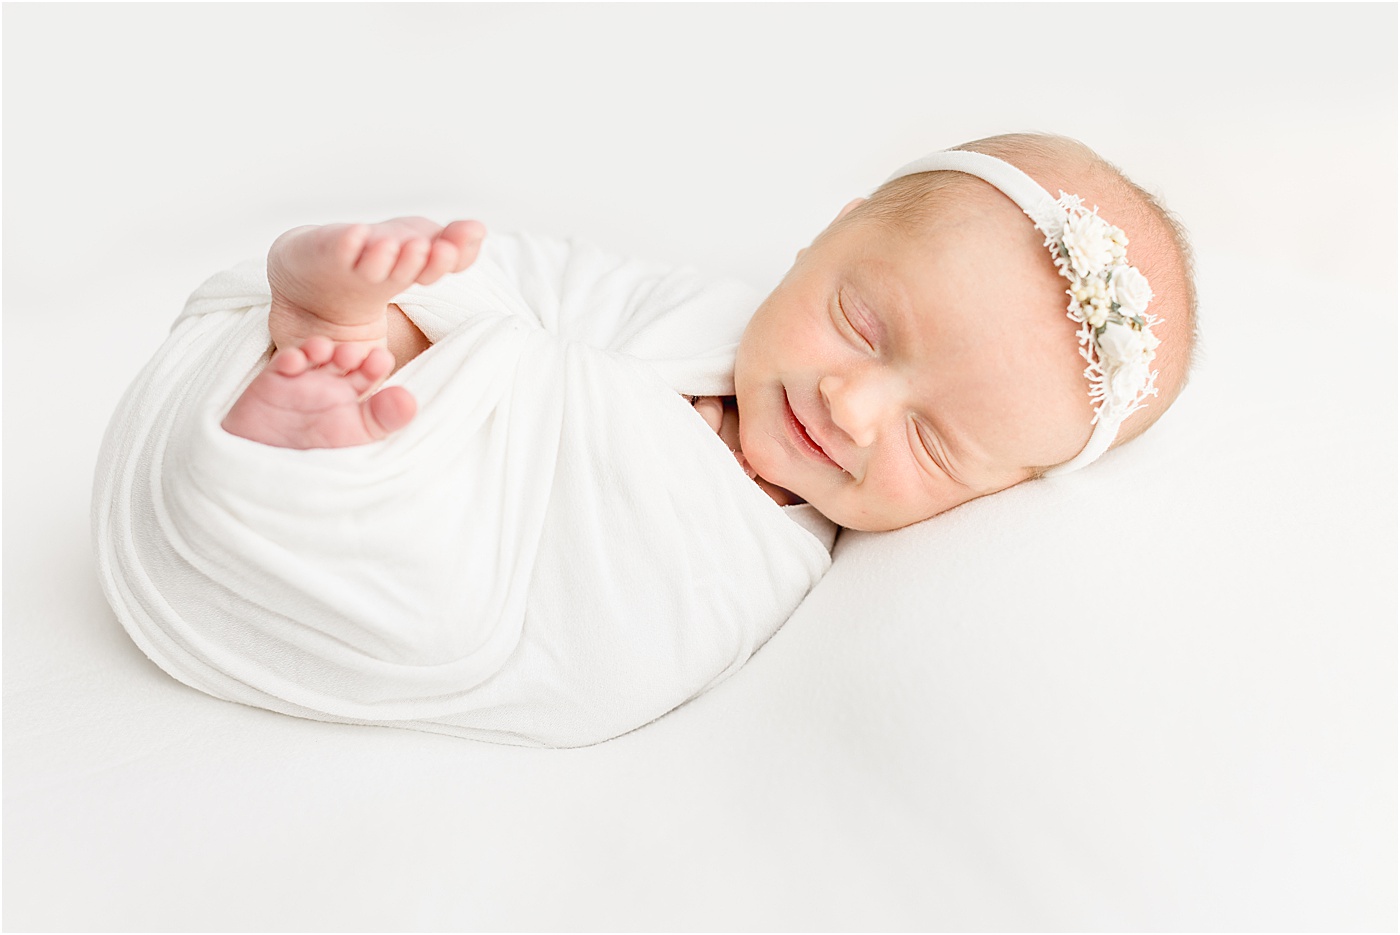 Smiling baby from newborn photography session in Austin studio. Photo by Sana Ahmed Photography.